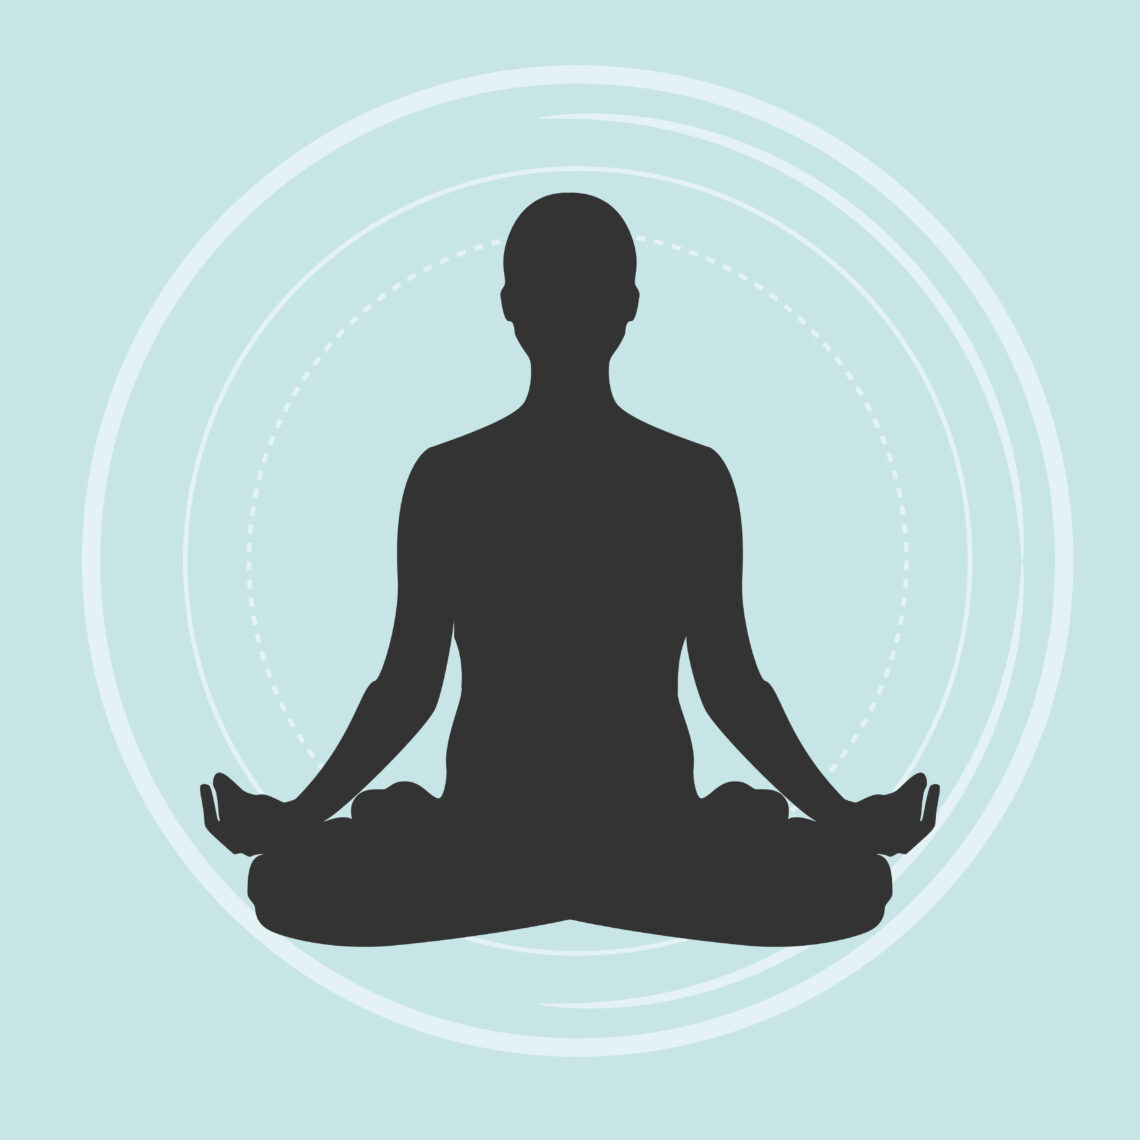 Human seated in traditional meditative posture, light blue background, white background circle